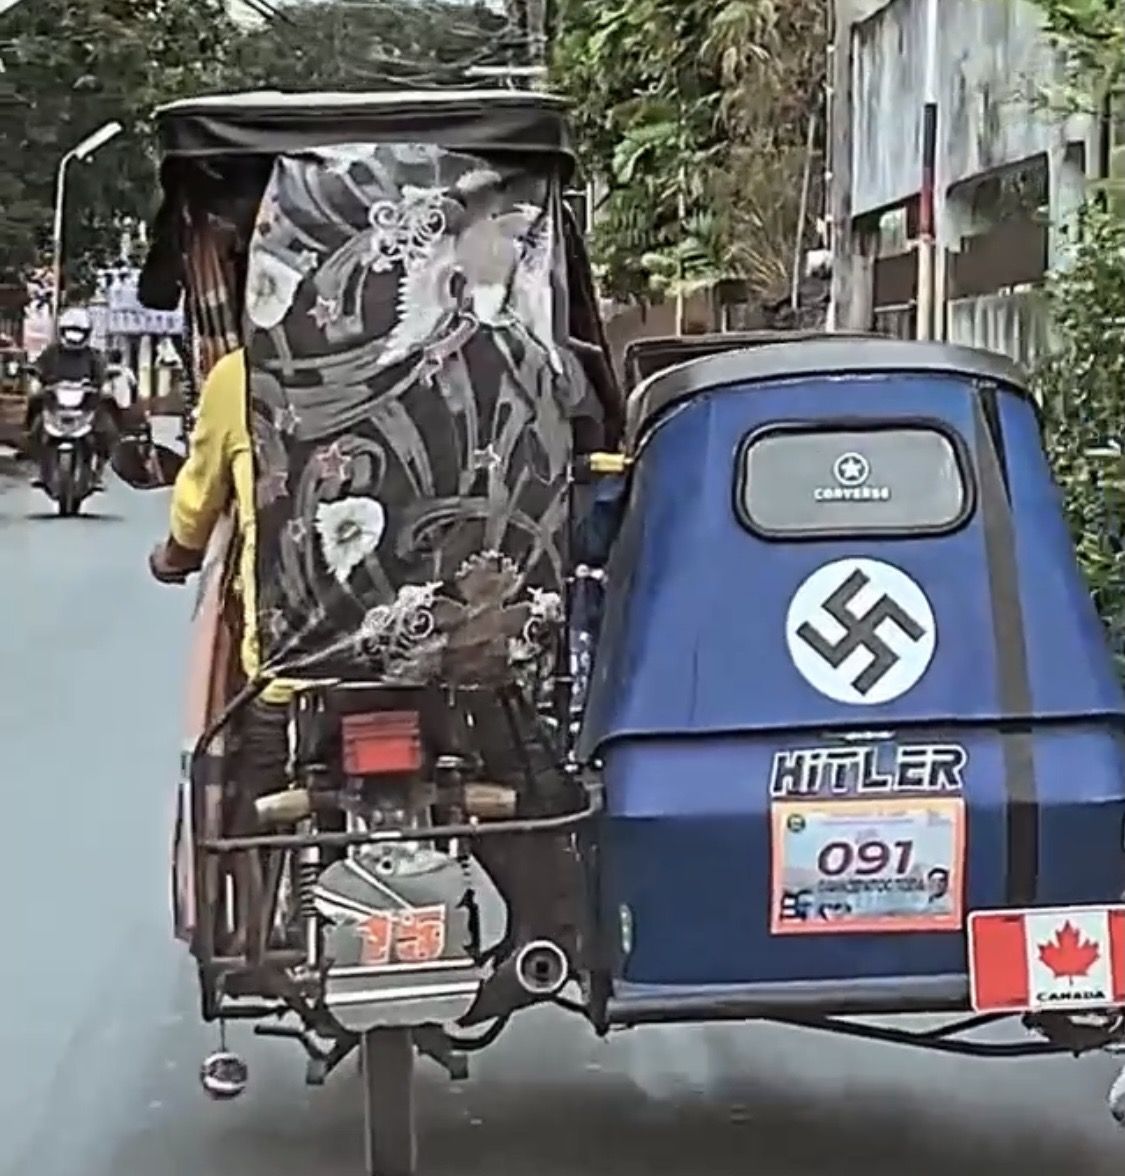 A vehicle of the Canadian National Socialist Unity Party roaming around the streets of Quebec